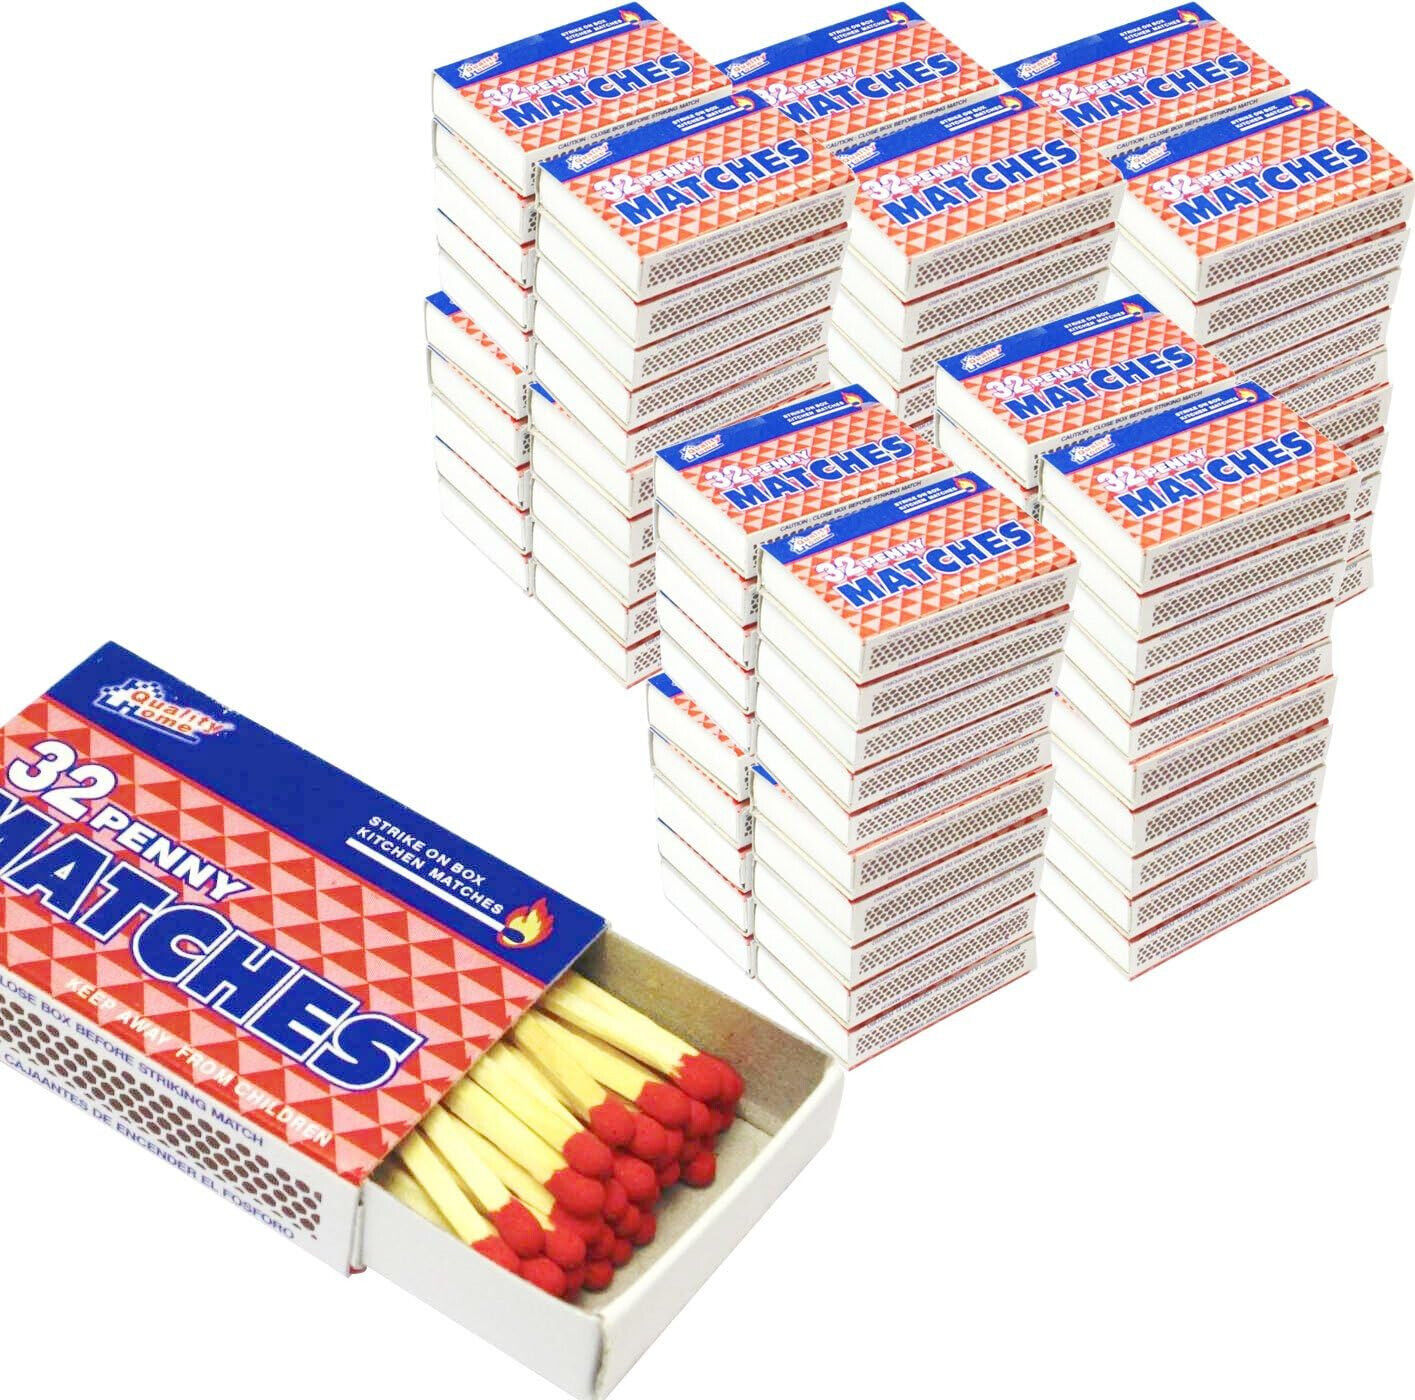 100 Packs Matches 32 count Strike on Box Kitchen Camping Fire Starter Lighter